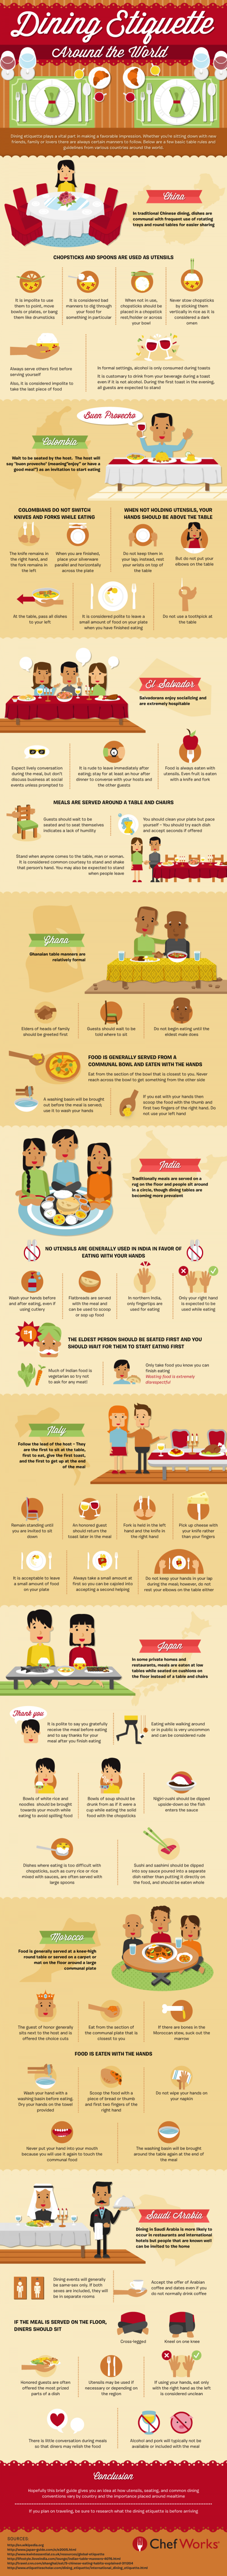 Dining-Etiquettes-around-the-world-infographic1